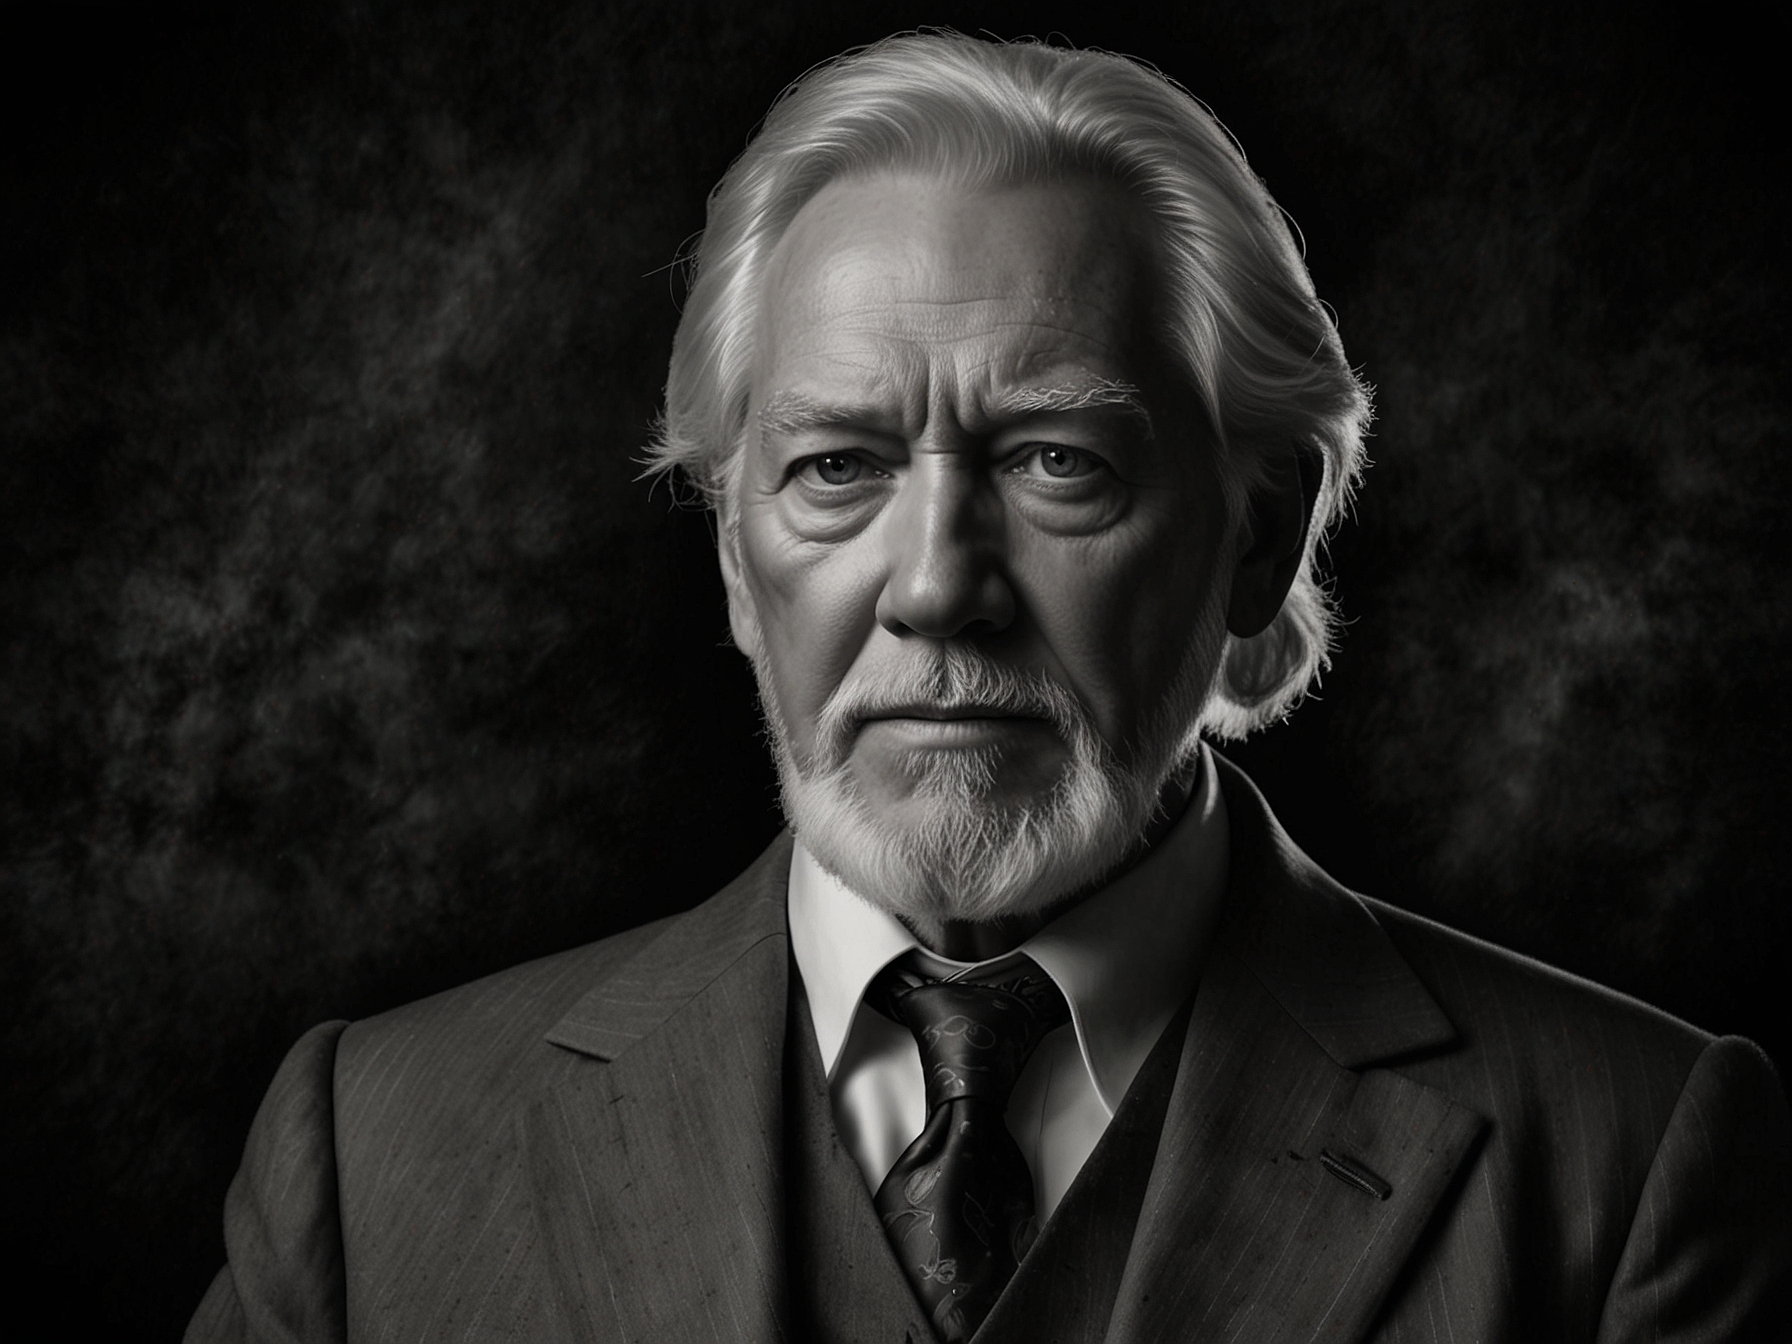 A black and white photo capturing Donald Sutherland as President Snow in 'The Hunger Games' series, a role that introduced him to a new generation of fans and demonstrated his range as an actor.